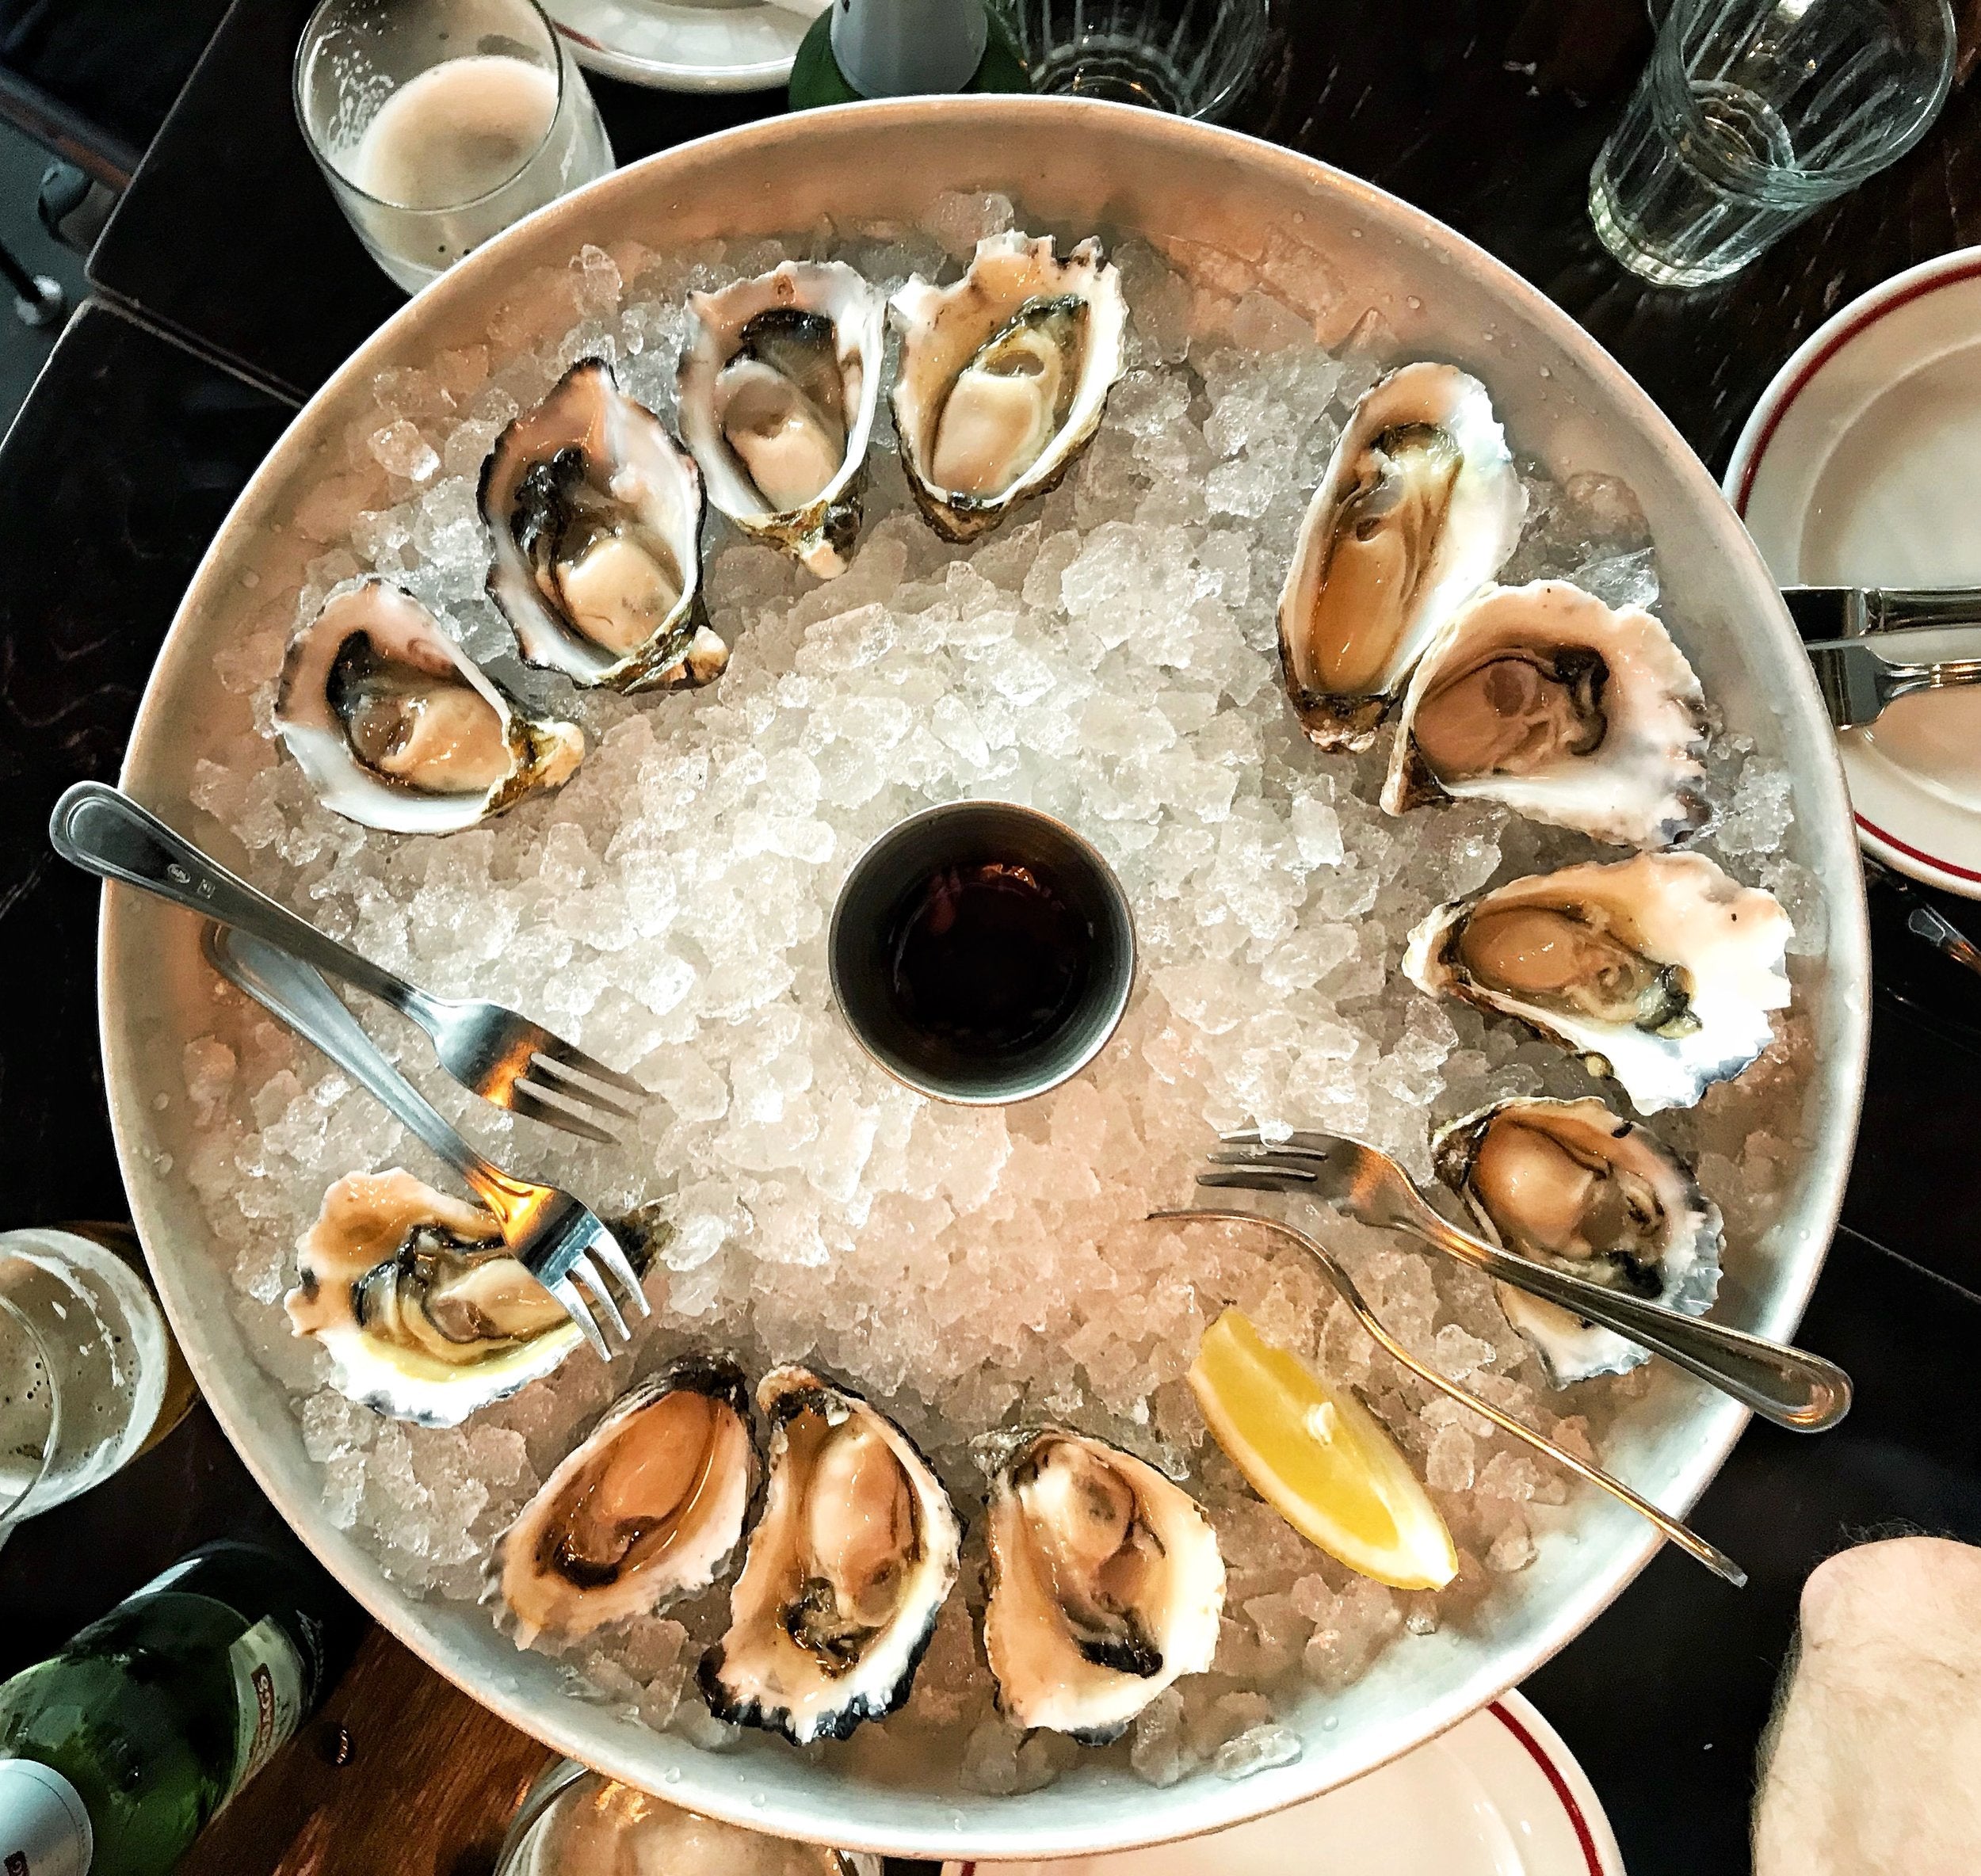 The Morrison Bar & Oyster Room: A Glorious Syndey Shuck